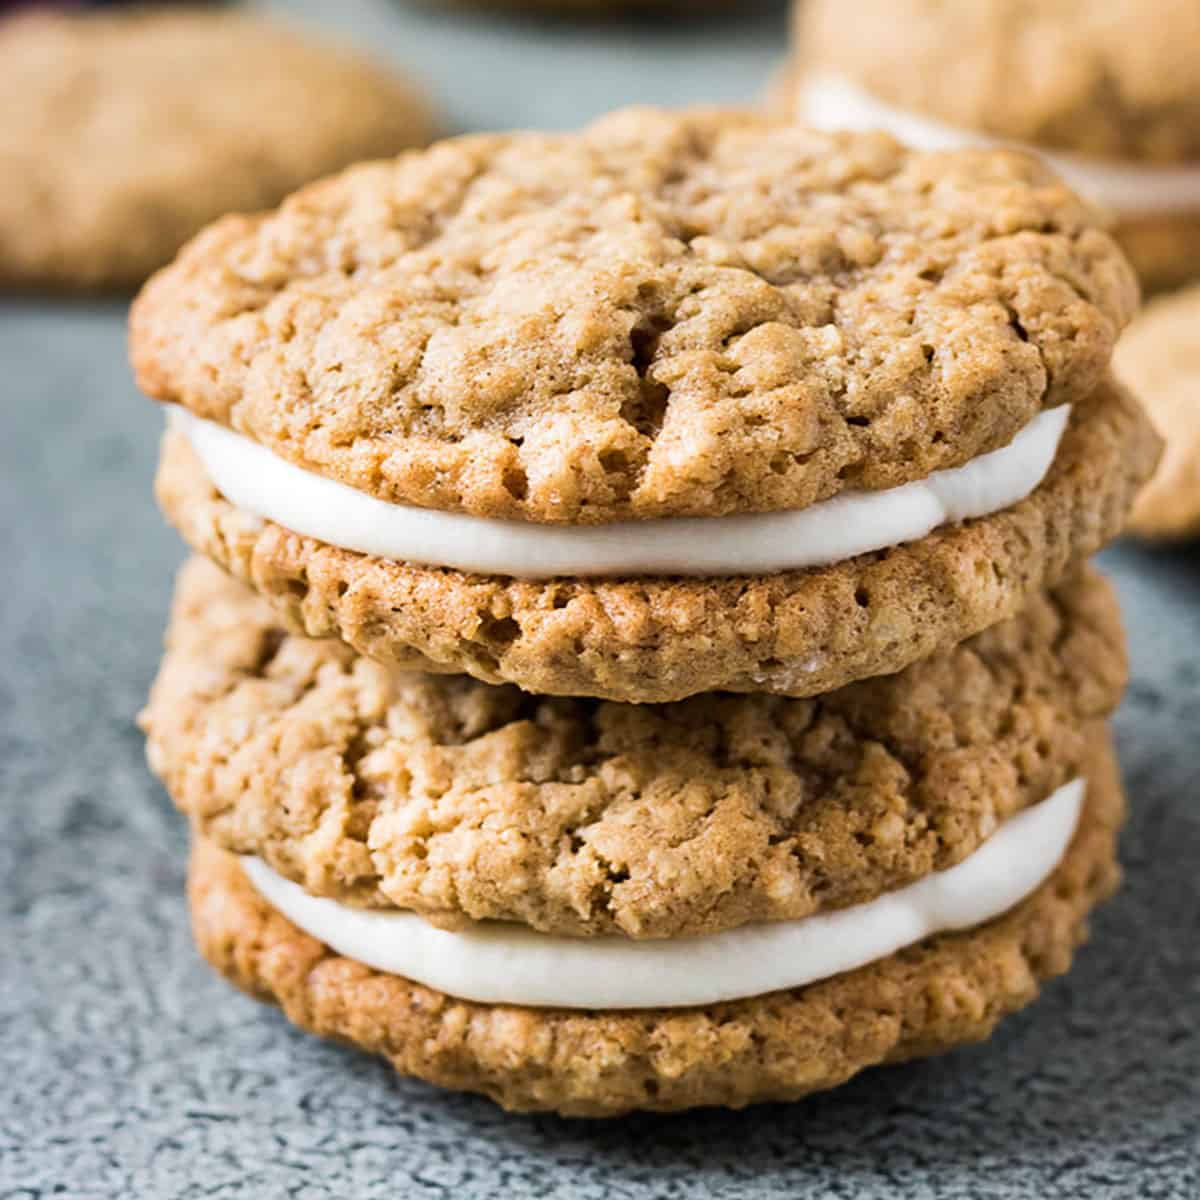 Two oatmeal cream pies stacked on a gray table.